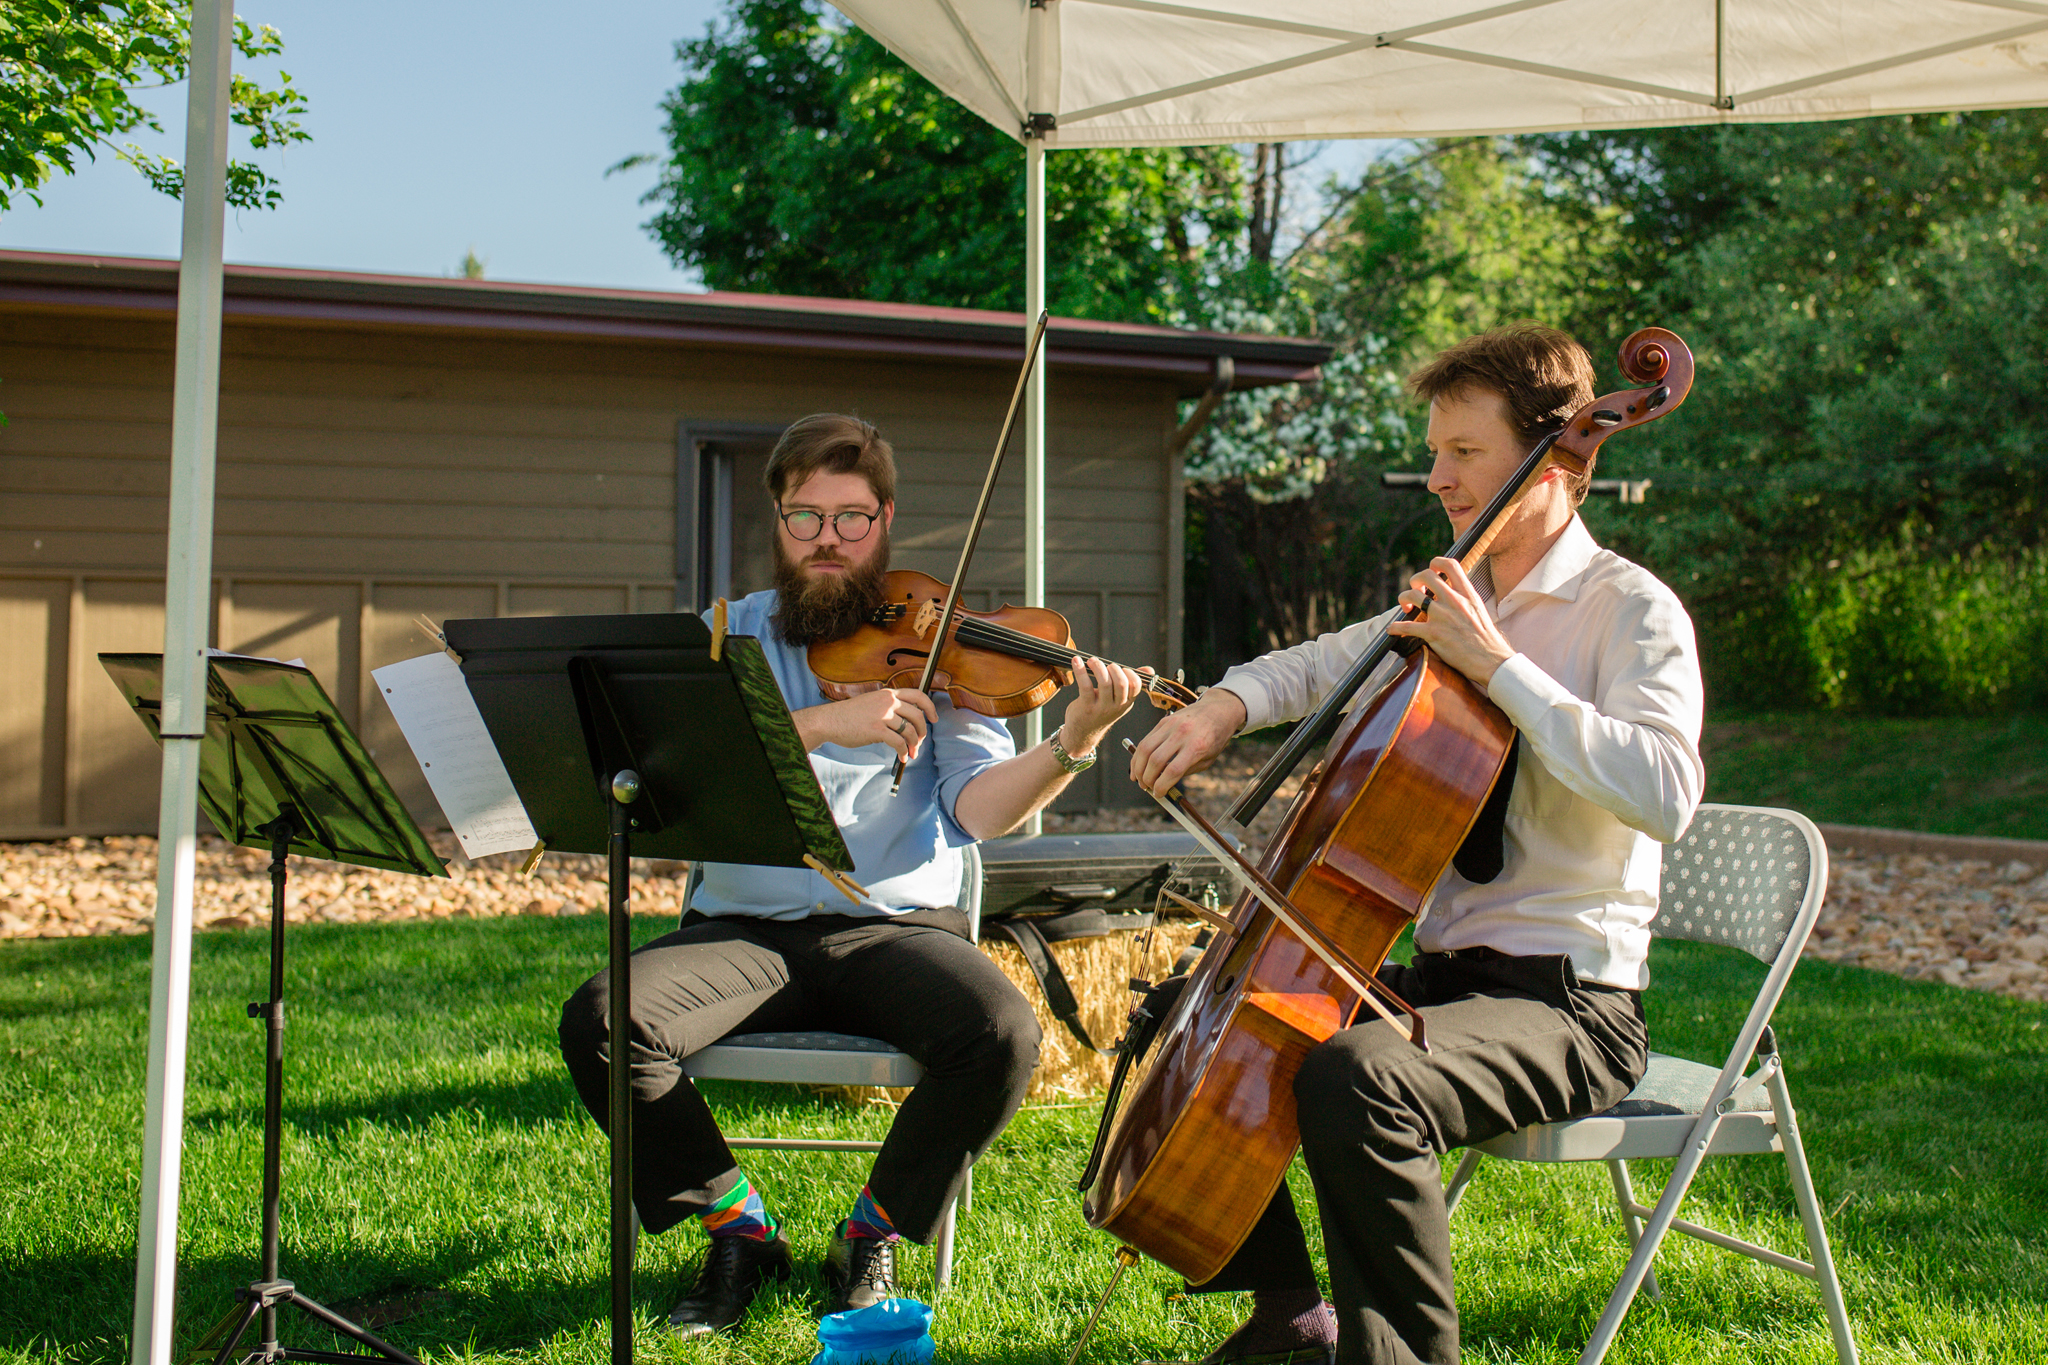 Cello & Violinist playing at the end of the wedding ceremony. Kyley & Brian's Boulder Backyard Wedding and The Mediterranean Restaurant Reception by Colorado Wedding Photographer, Jennifer Garza. Colorado Wedding Photographer, Colorado Wedding Photography, Colorado Top Wedding Photographer, Boulder Wedding Photographer, Boulder Wedding, Backyard Wedding Photographer, Backyard Wedding, The Mediterranean Restaurant, The Med, The Med Reception, Intimate Wedding, Small Intimate Wedding, Rocky Mountain Wedding, Rocky Mountain Bride, Colorado Bride, Here Comes the Bride, Couples Goals, Brides of Colorado